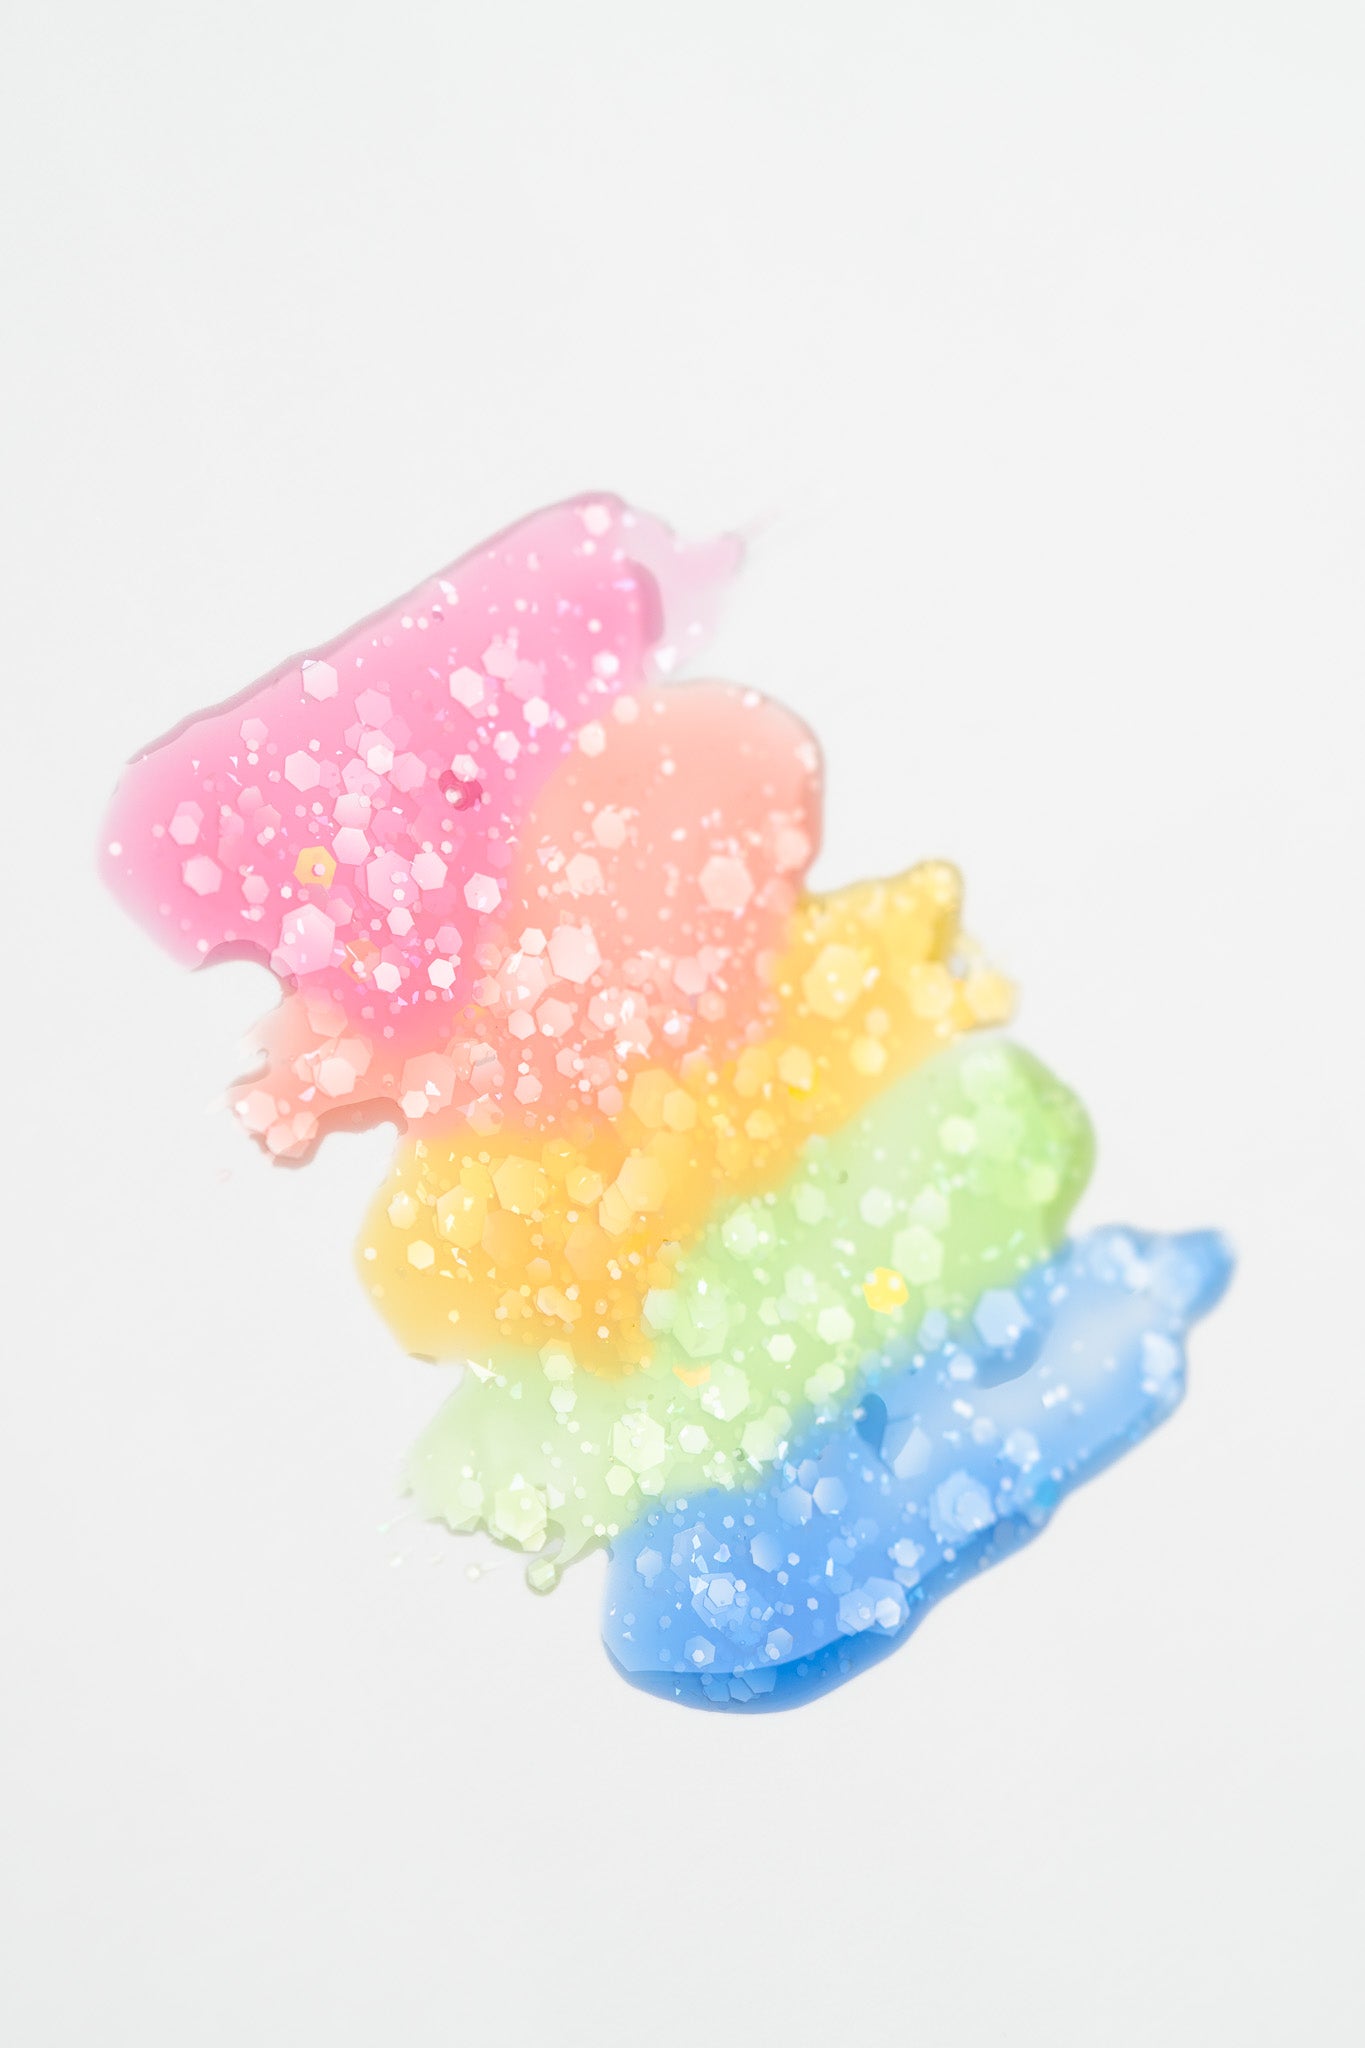 Candy Gels